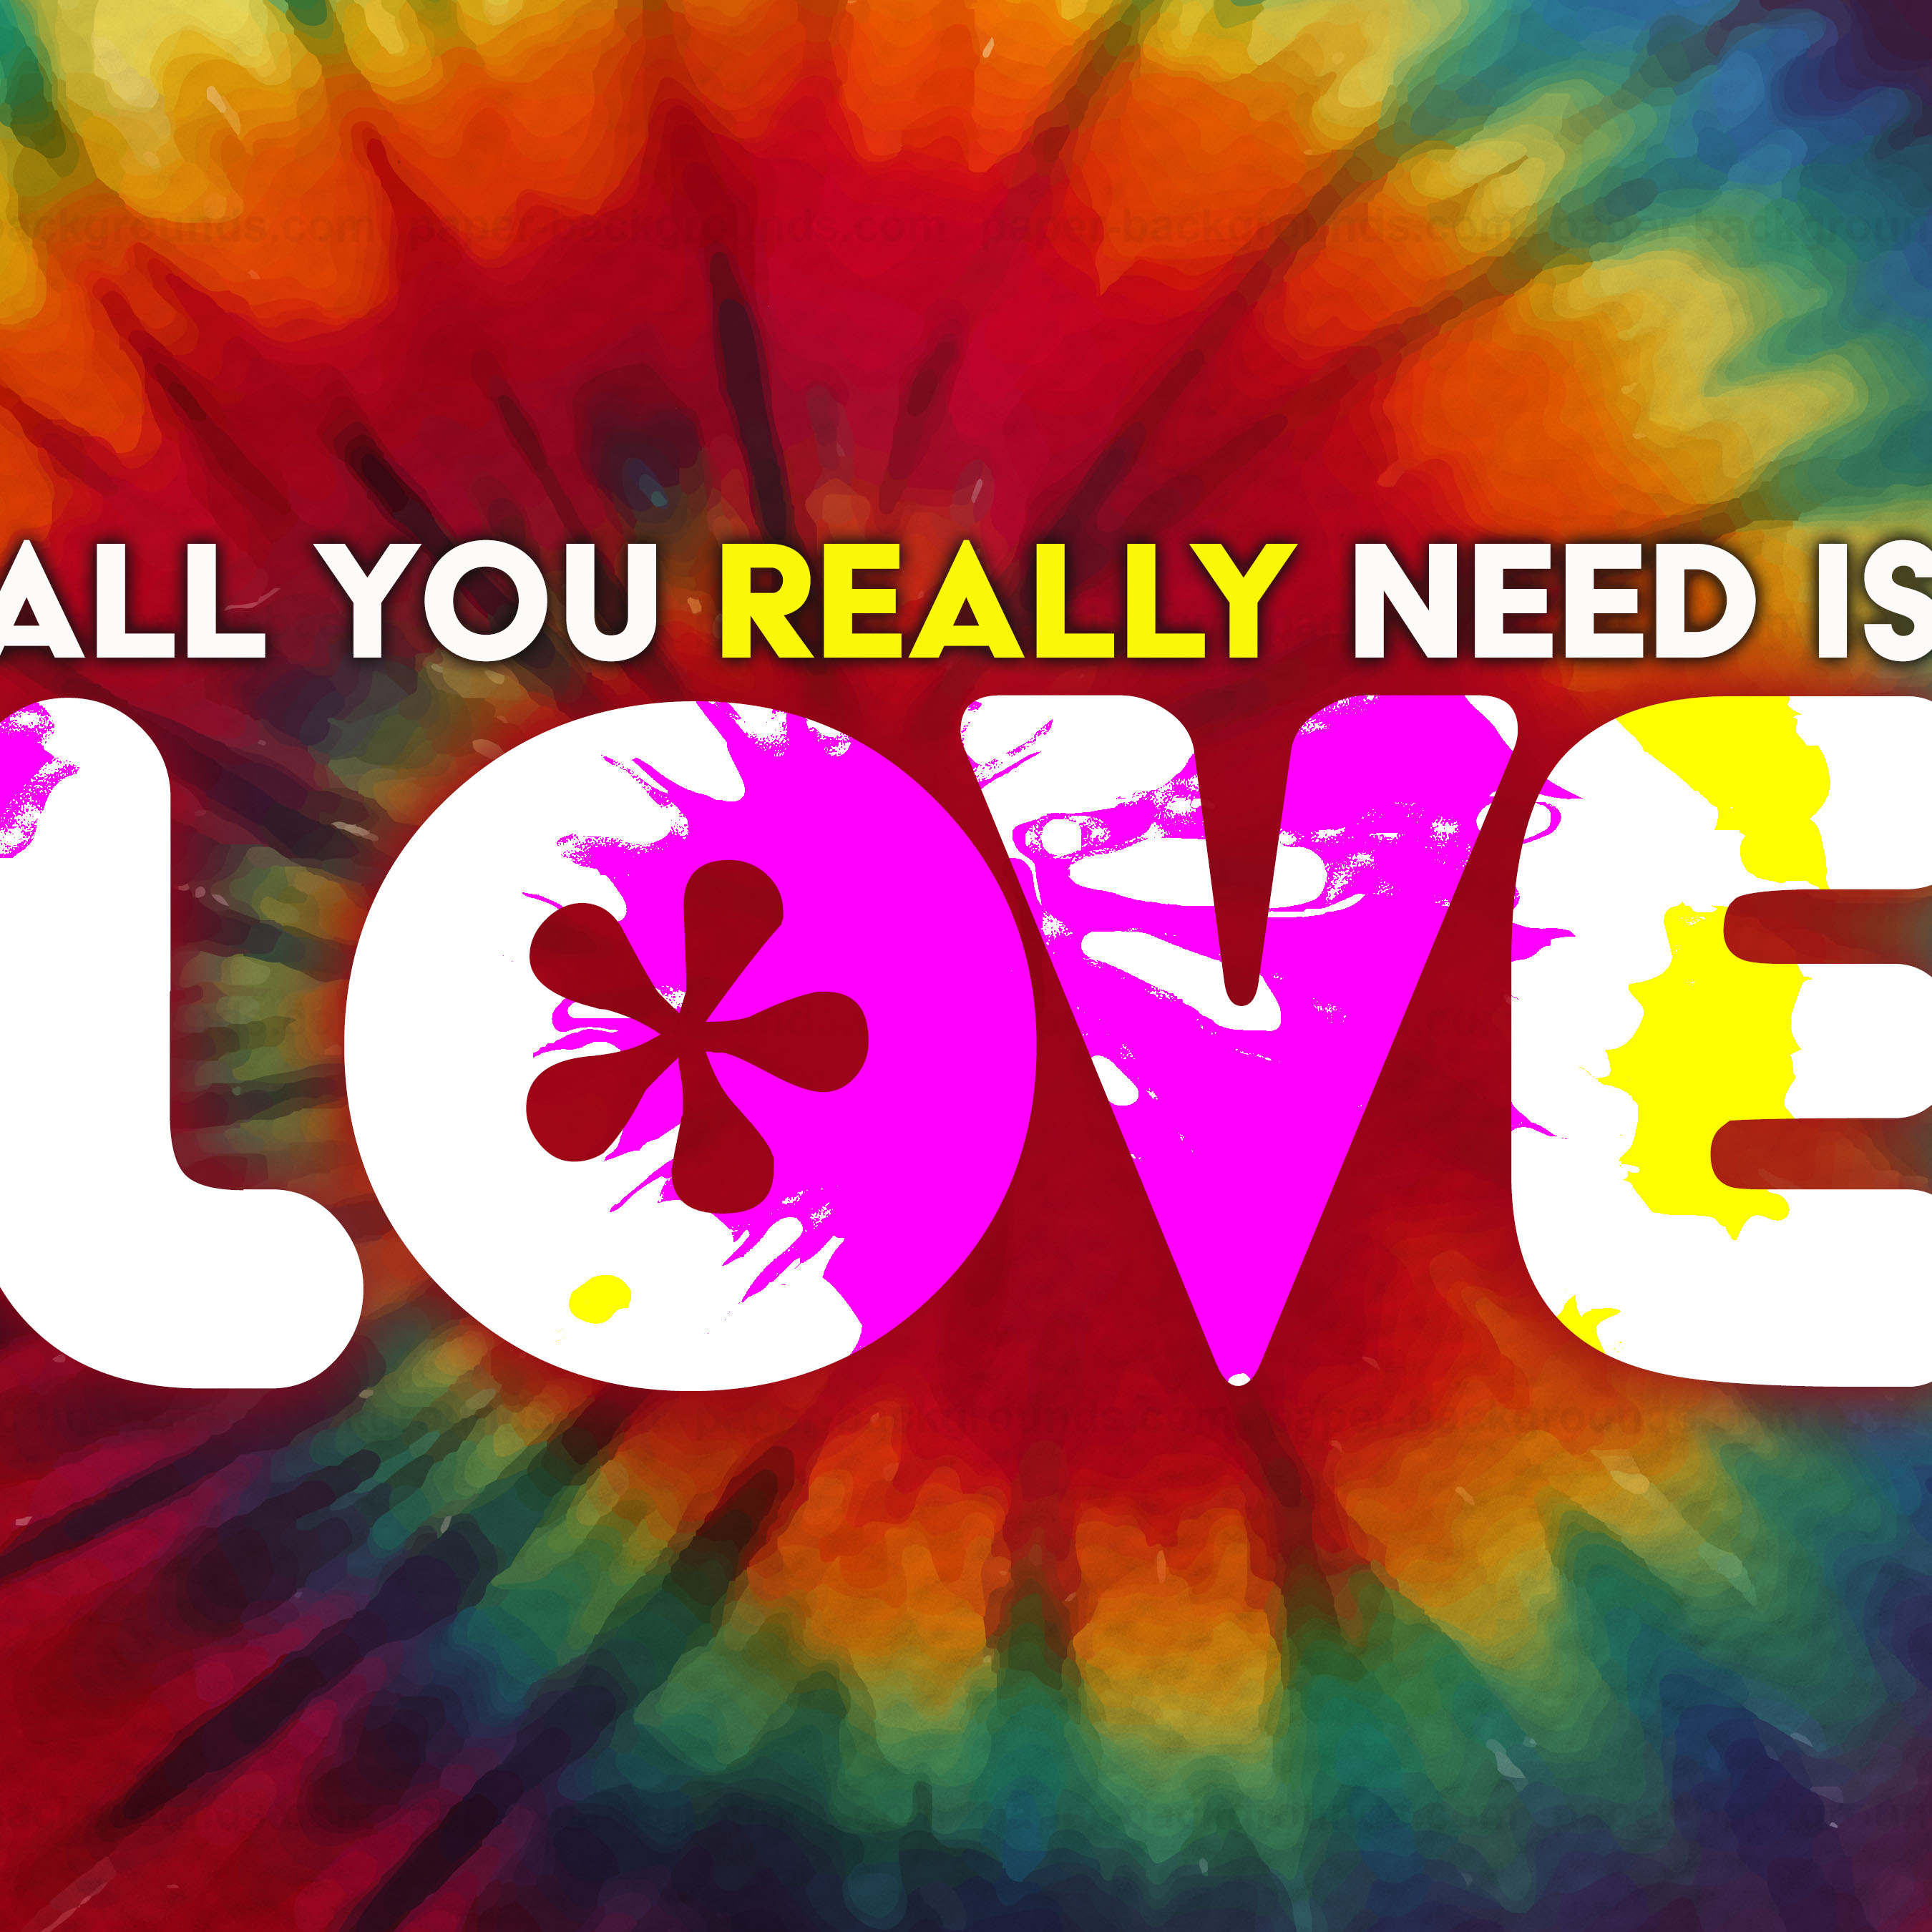 All You Really Need Is Love - Part 4